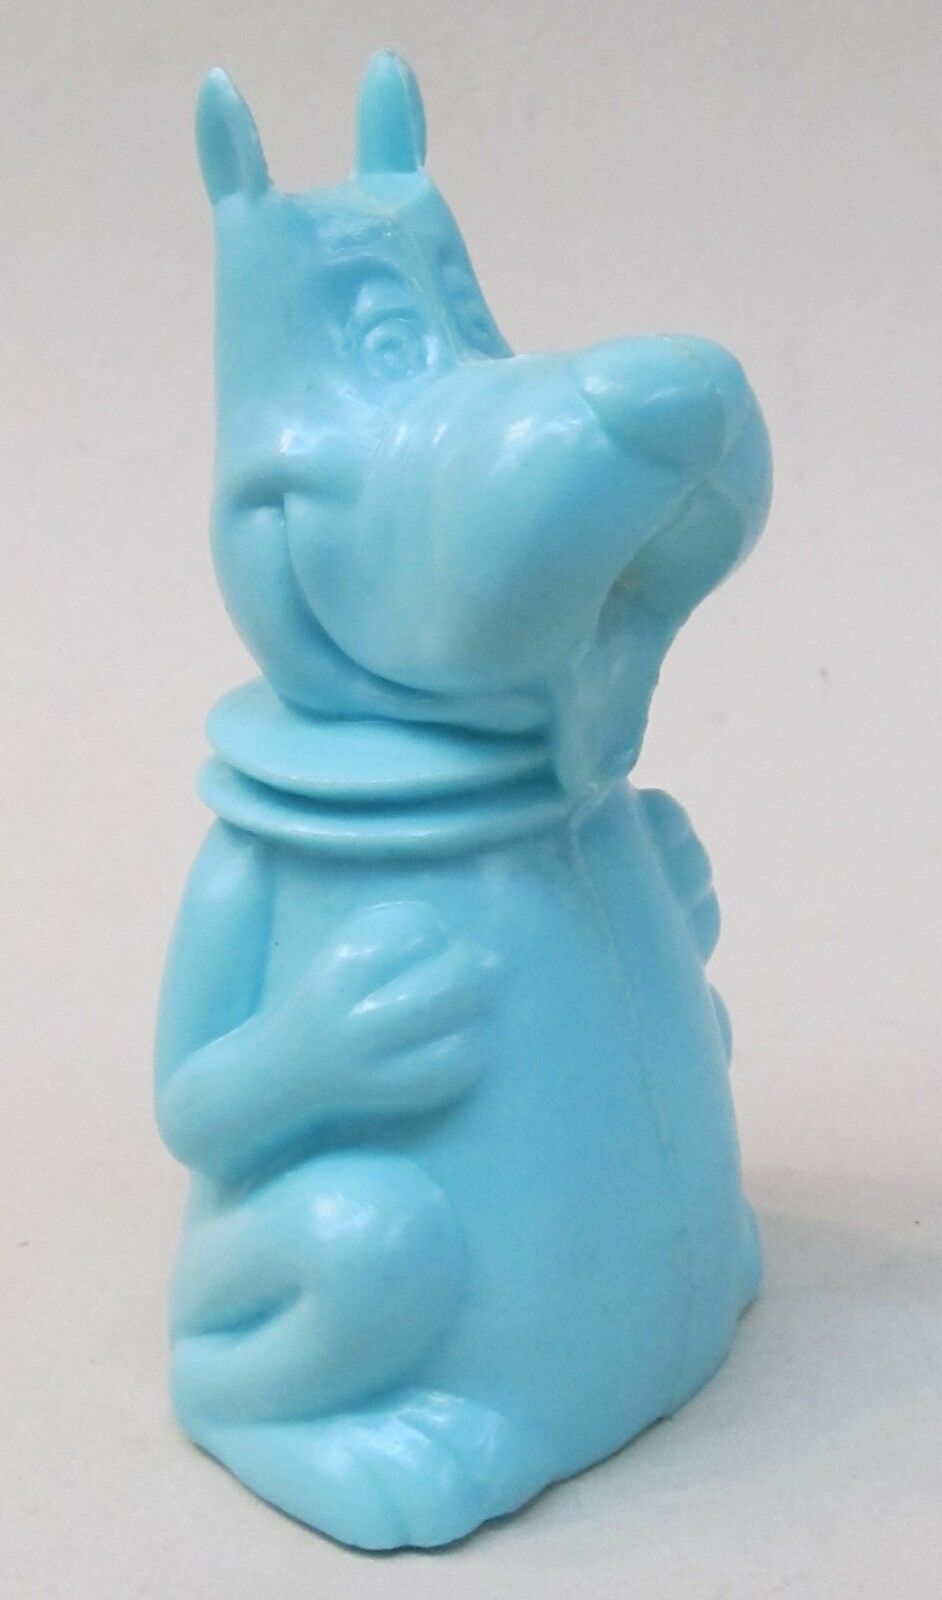 1963 Marx Astro Dog From The Jetsons. Blue  Hard Plastic